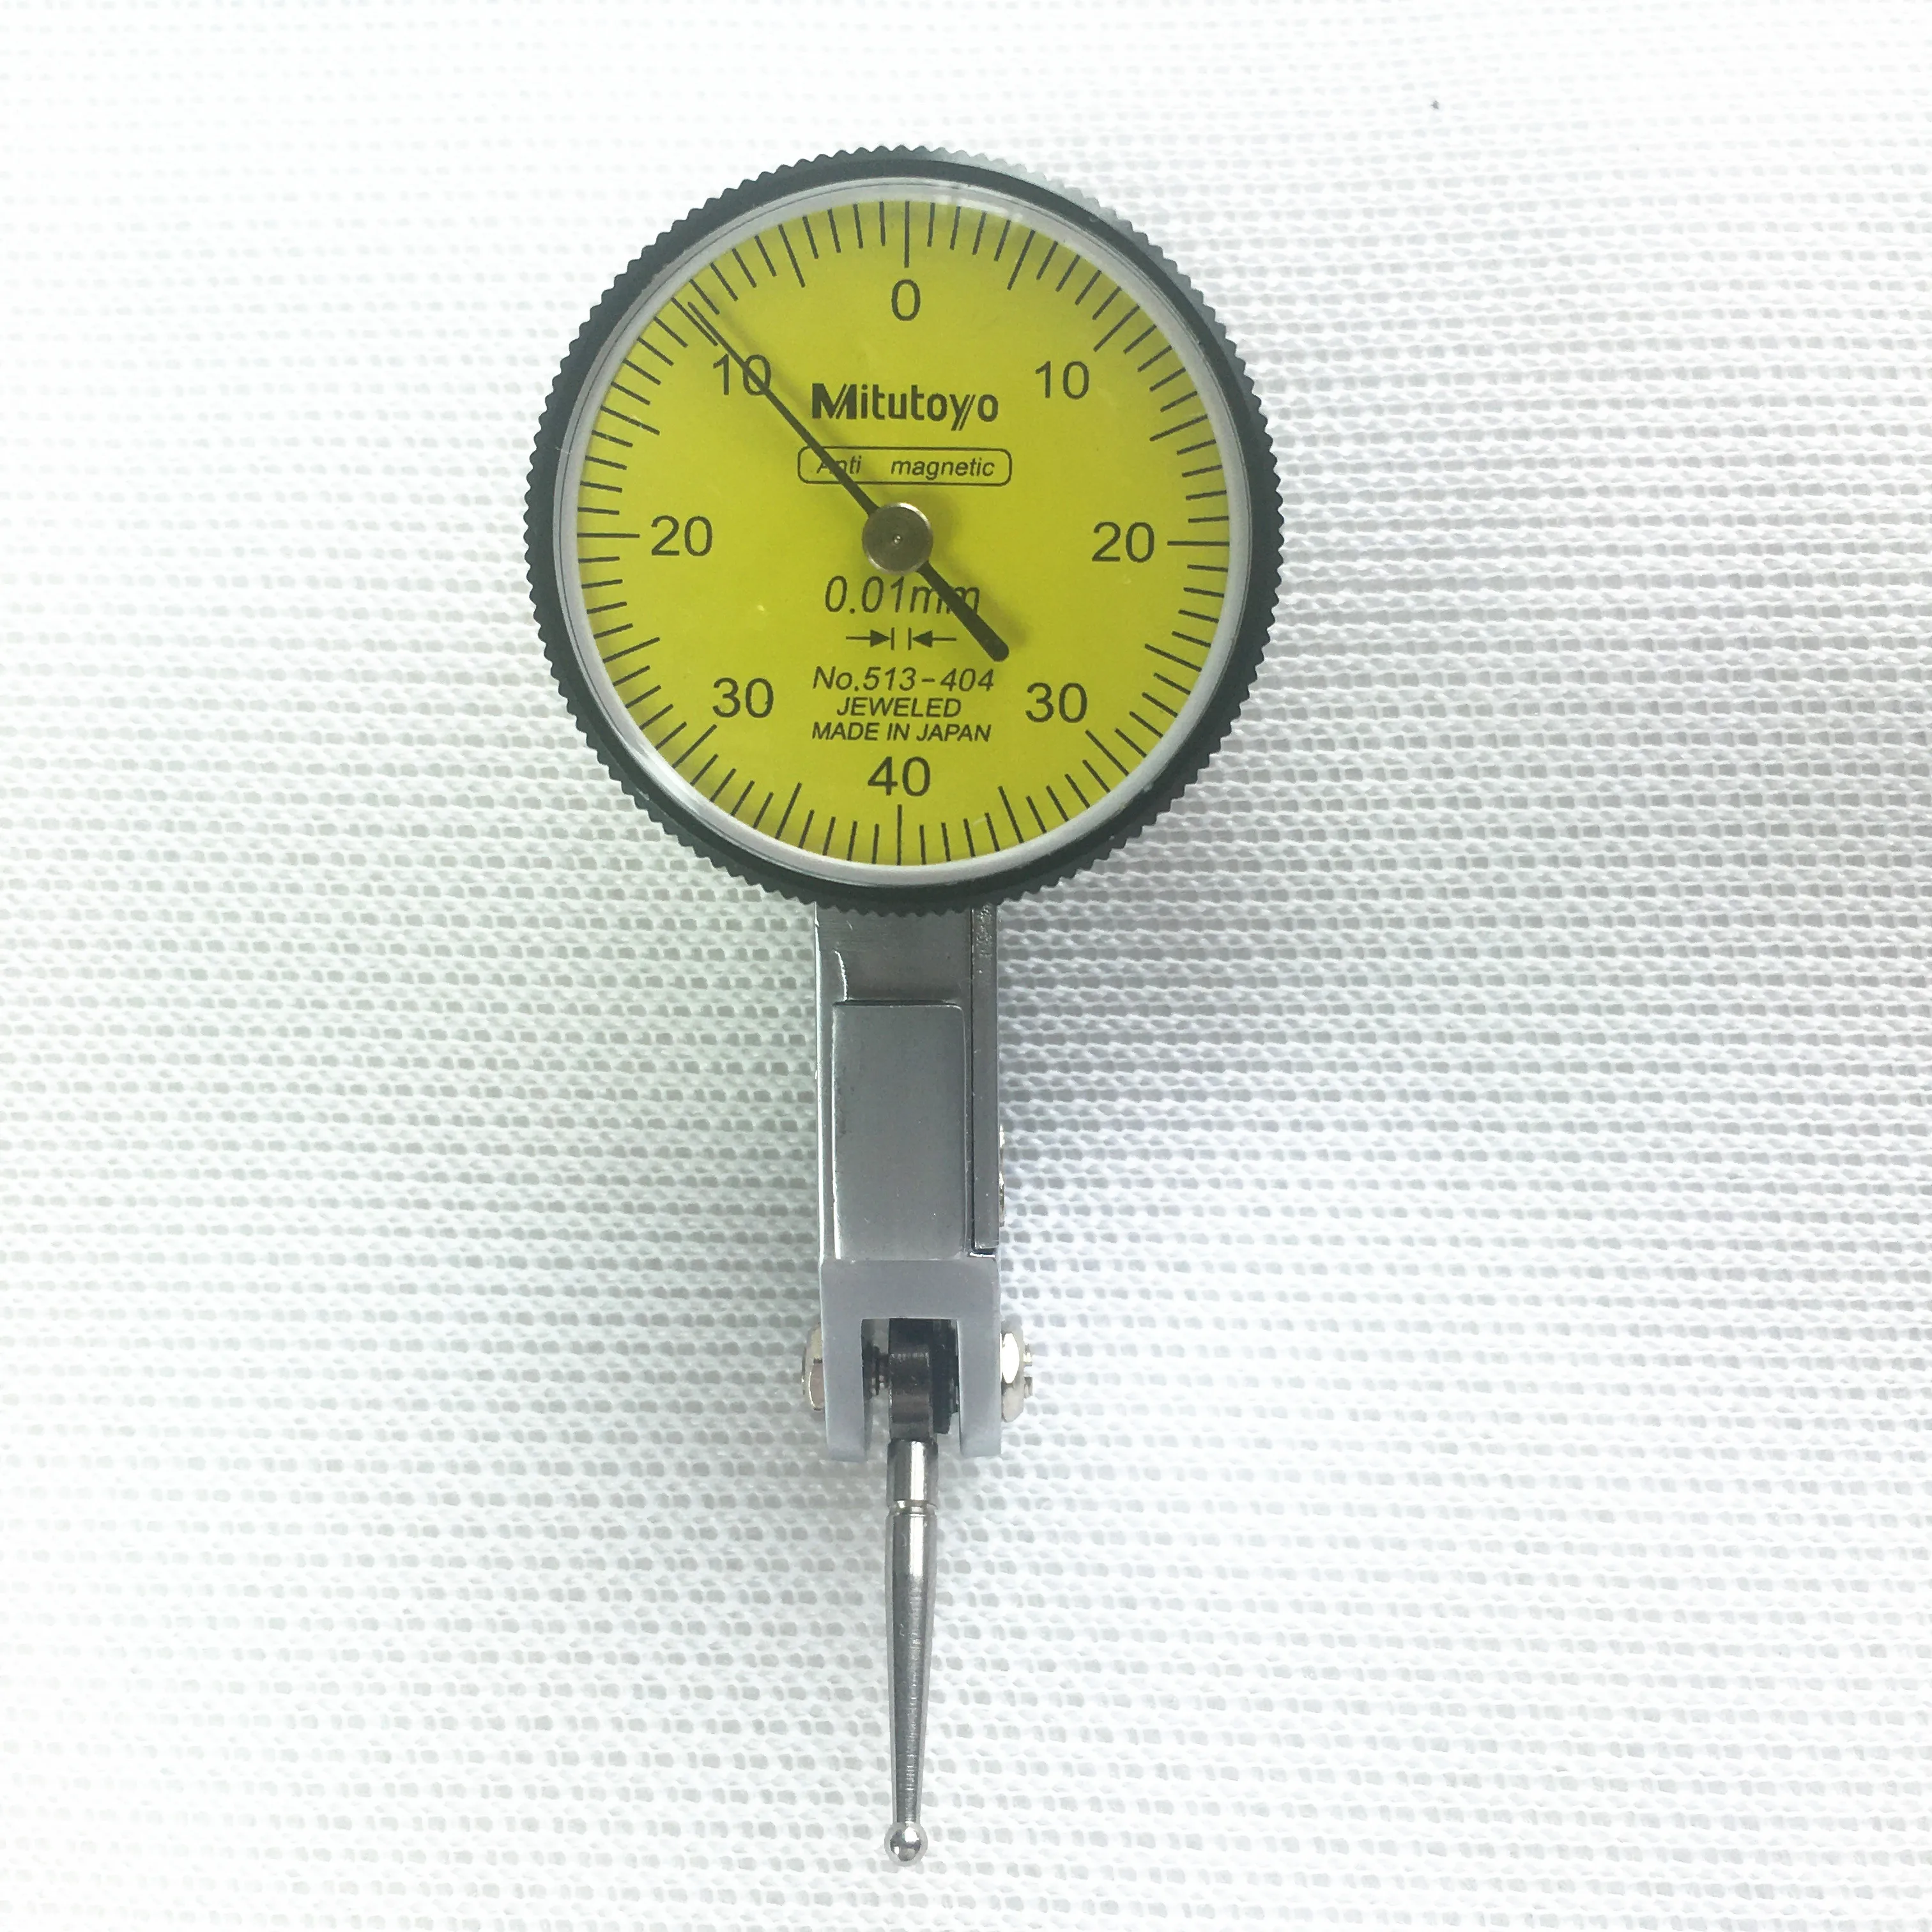 NEW Japan Mitutoyo Dial Test Indicator 0-0.8mm NO.513-404 0.01mm Free shipping 